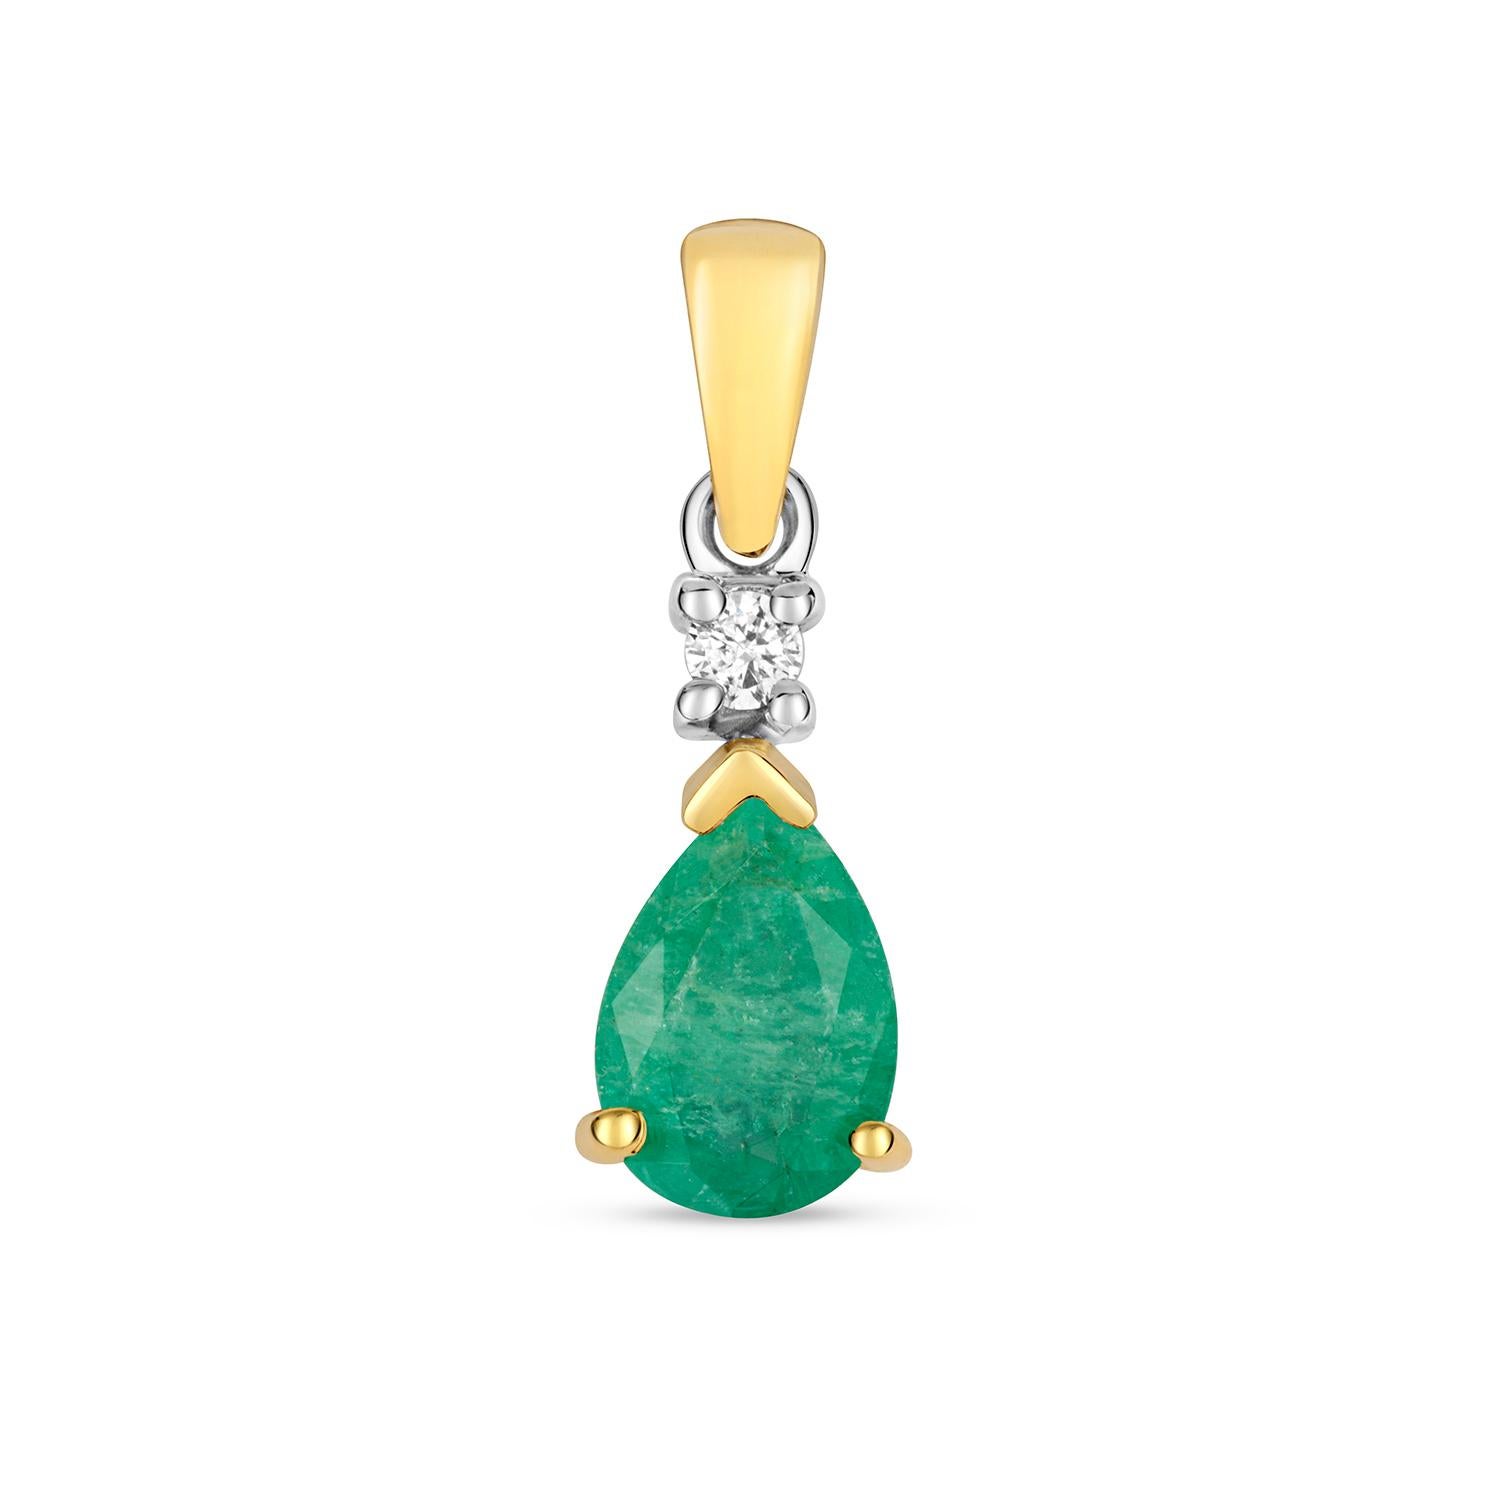 EMERALD PENDANT PEAR

9CT Y/G PR/7X5 EMD

Weight: 0.85g

Number Of Stones:1

Total Carates:0.750